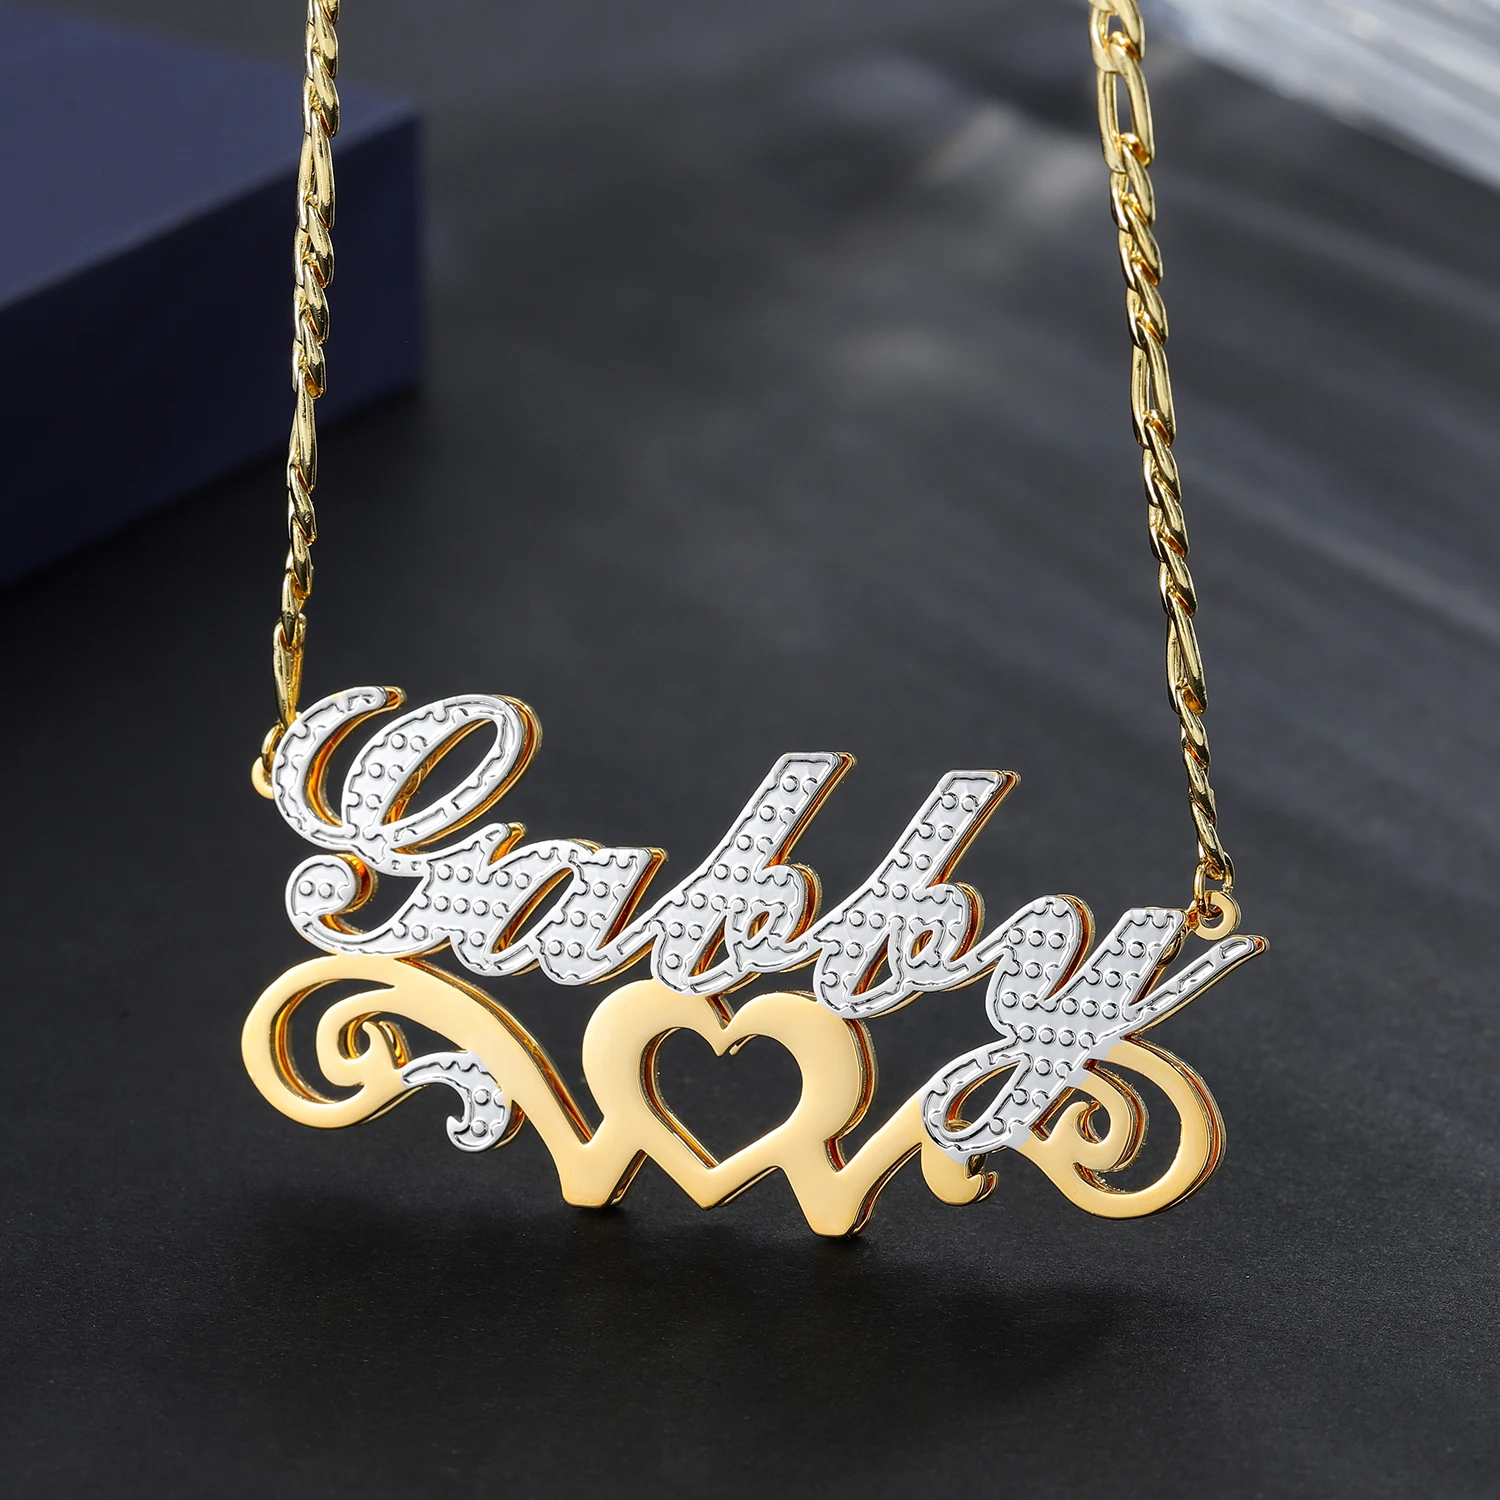 Customized Necklace Double Plated Heavenly Love Name Necklace For Women Name Plate Stainless Steel Name Pendant Charm Jewelry willan an apostrophe to the heavenly hosts 1 cd